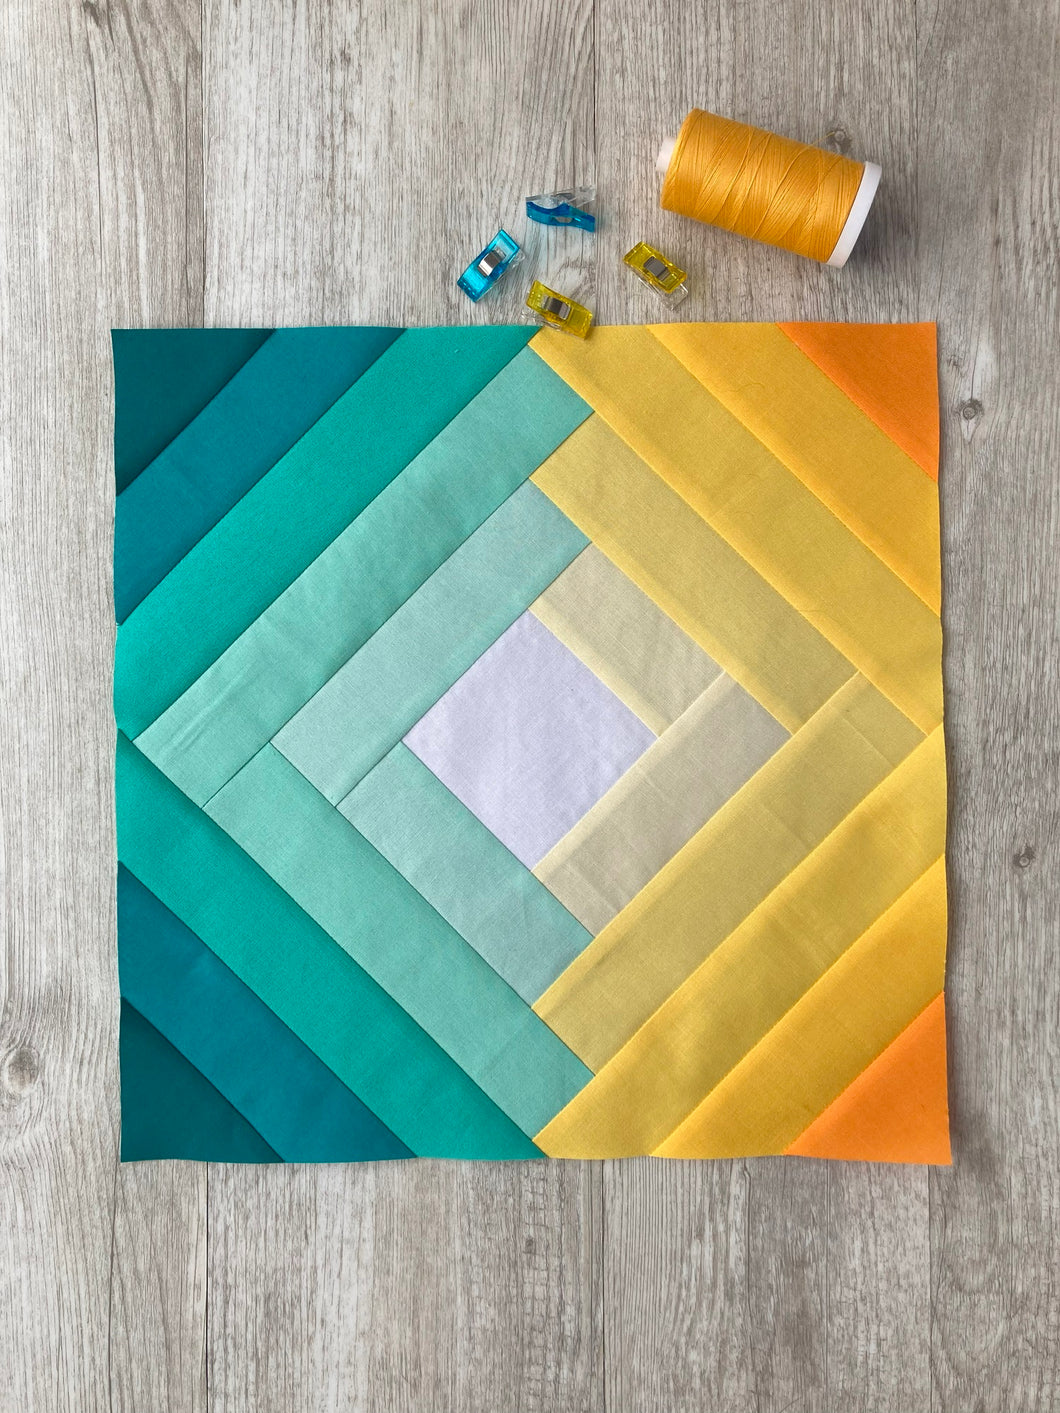 Twisted Log Cabin FPP Quilt Block - PDF Instant Download